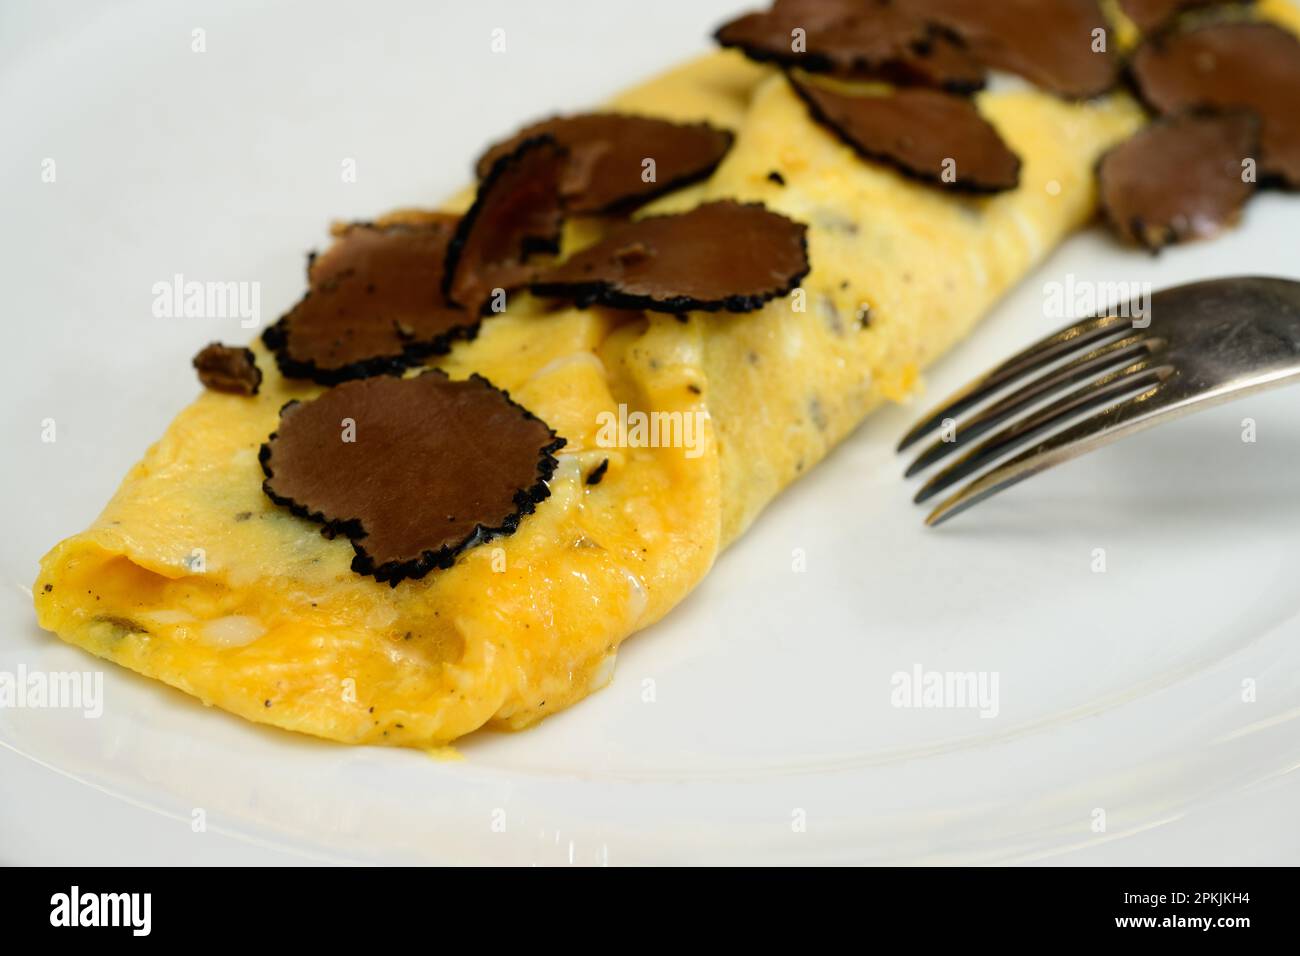 French Truffle Omelette Eggs or Omelette auc Truffes with Black Summer Truffles Close Up Stock Photo